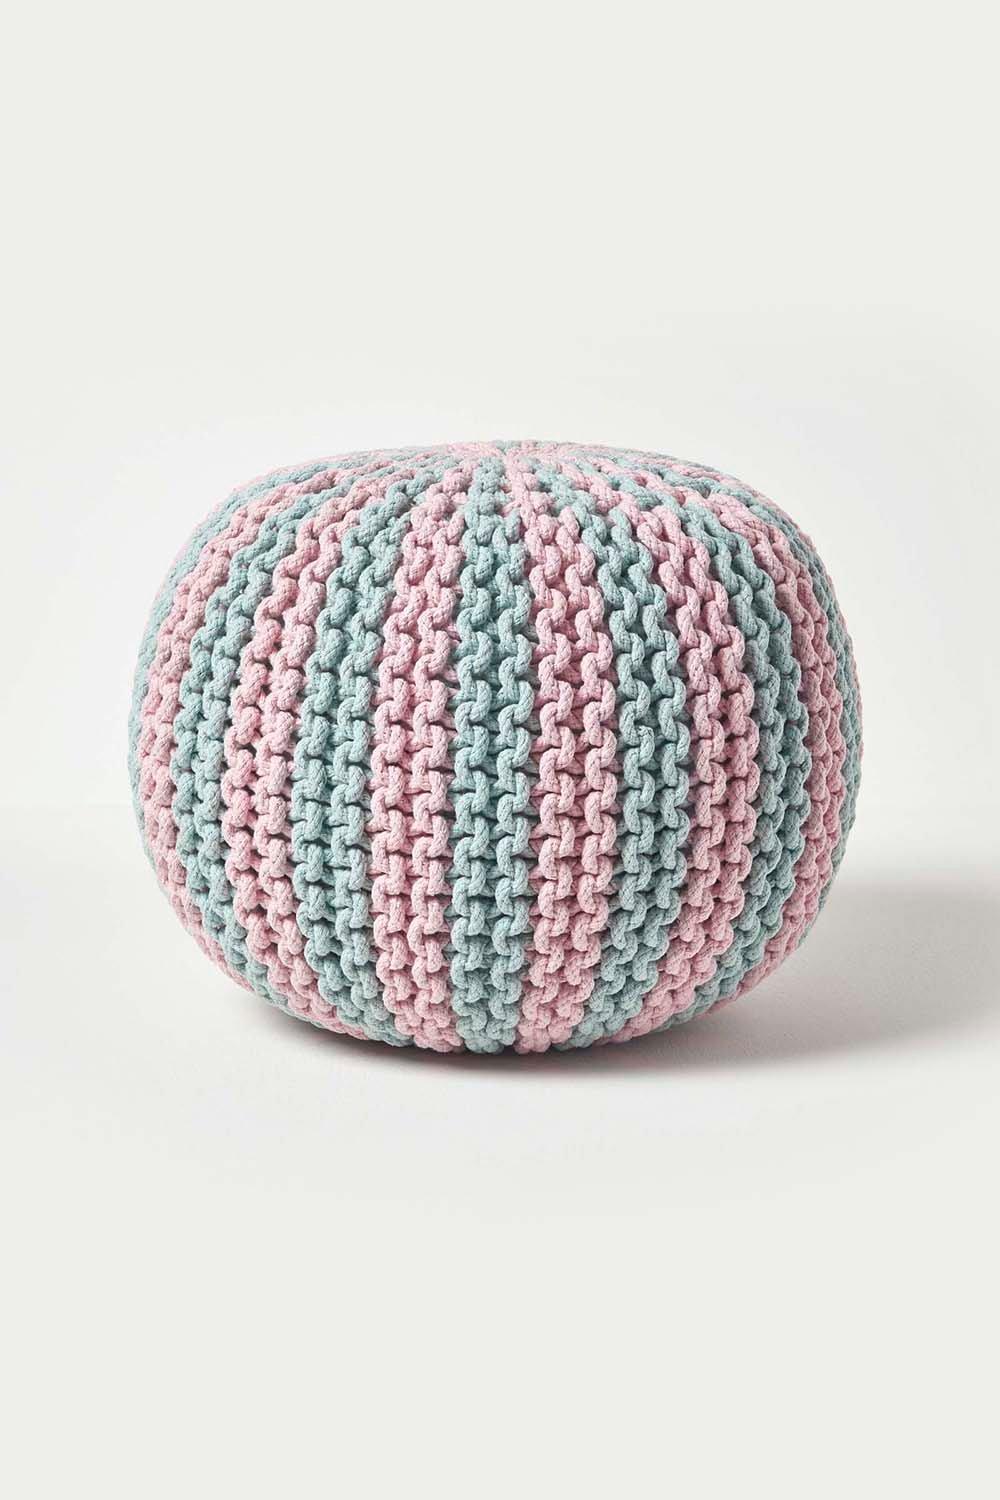 Homescapes Knitted Pouffe Striped Footstool 35 x 40 cm|pink